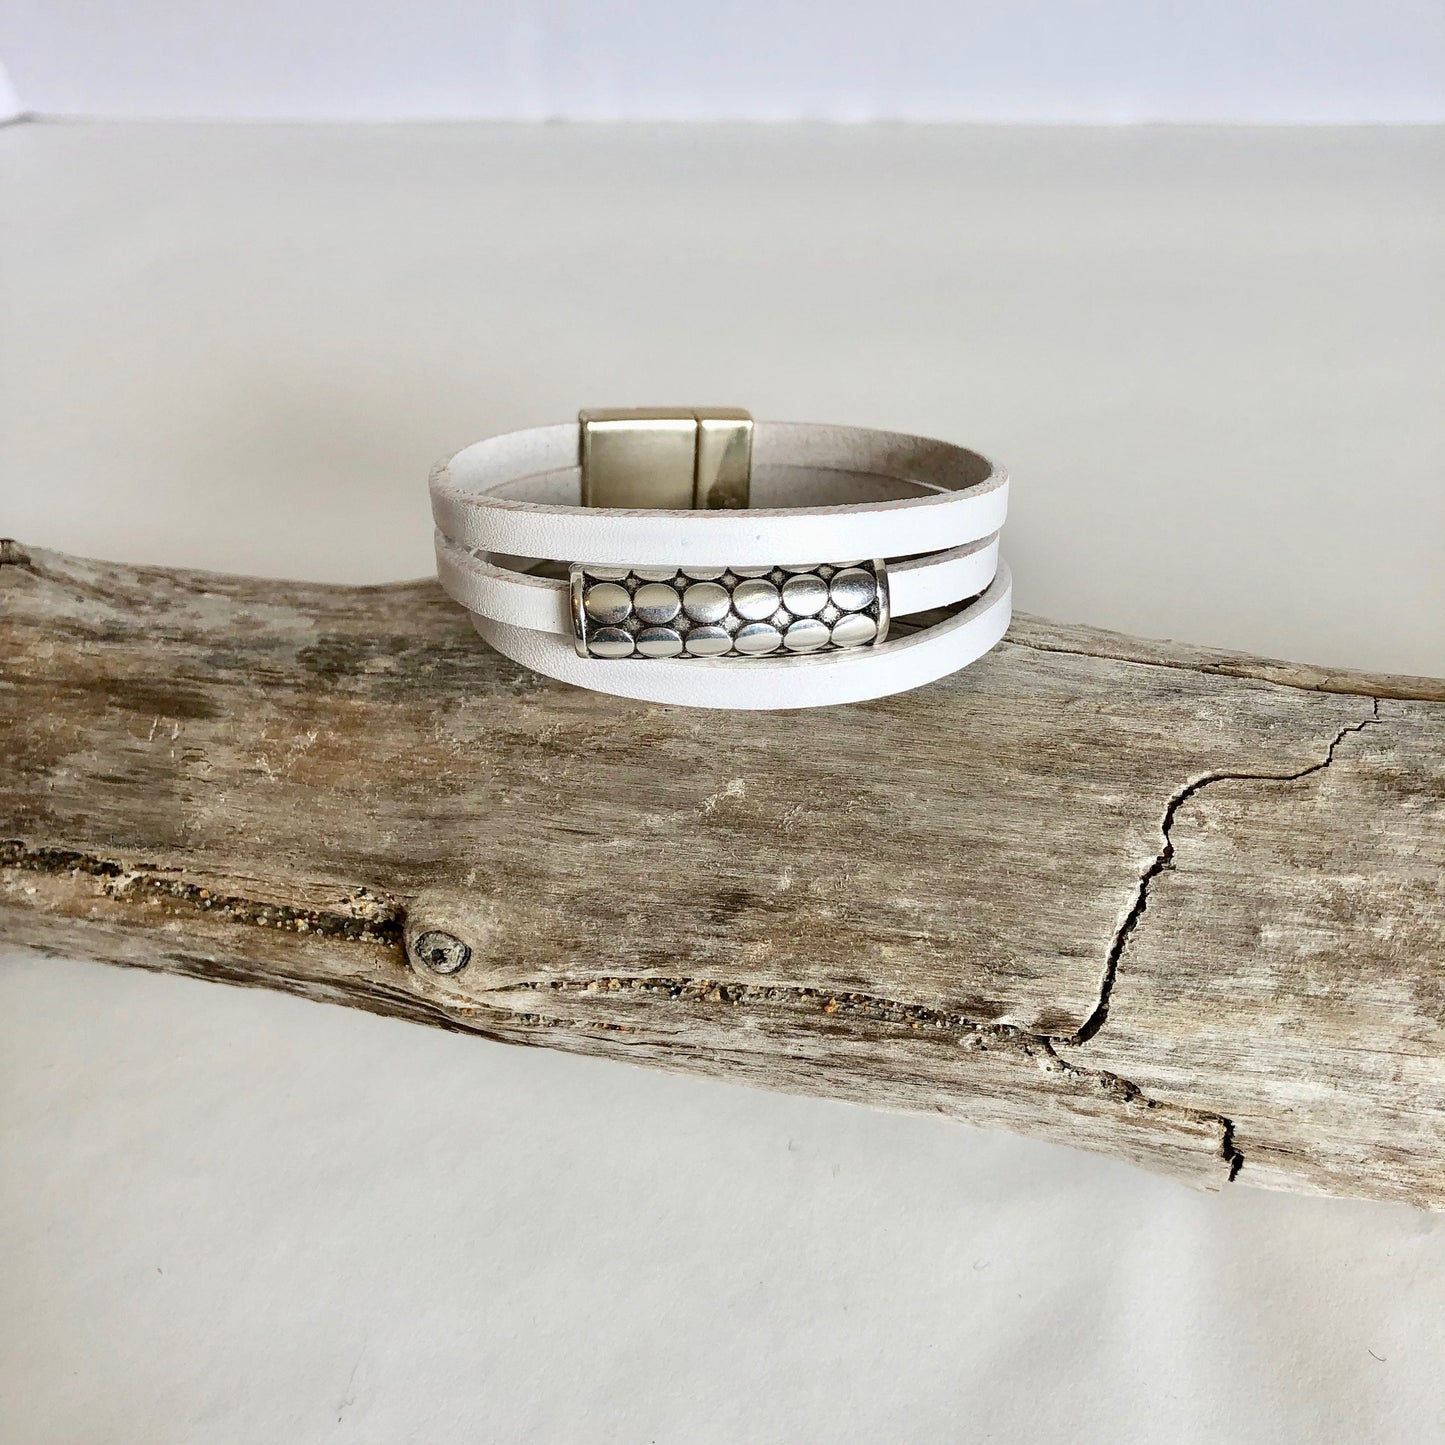 Leather bracelet, made of fine white three wrapped Italian leather, a beautiful silver slide, and finished with a quality bronze magnetic clasp.